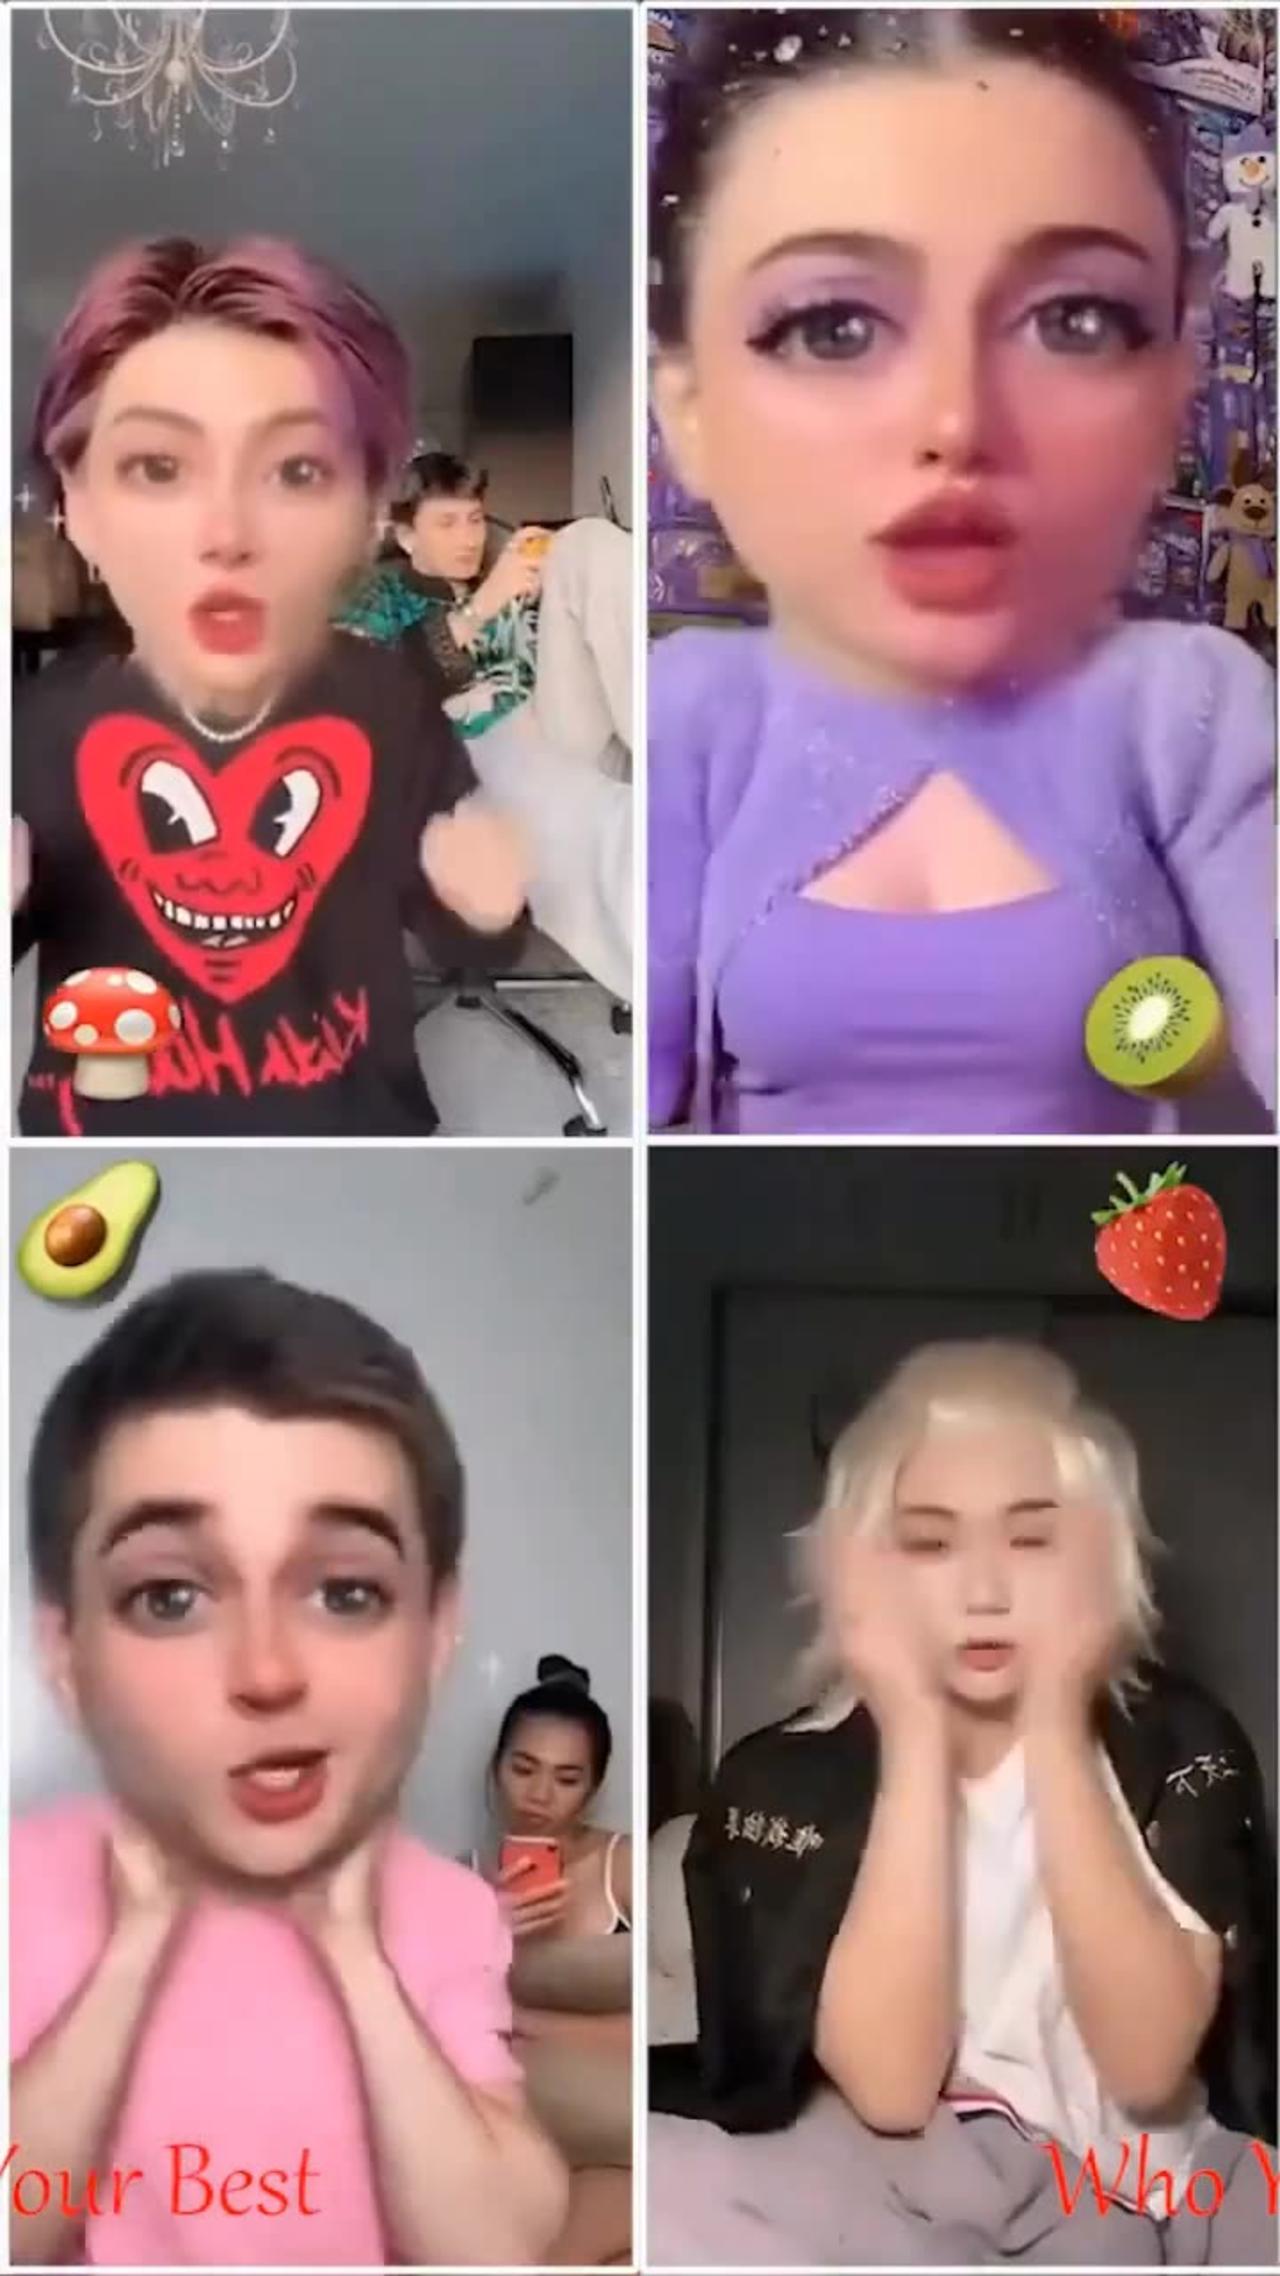 Watch this TikTok Viral Trends, Memes, Music, and More